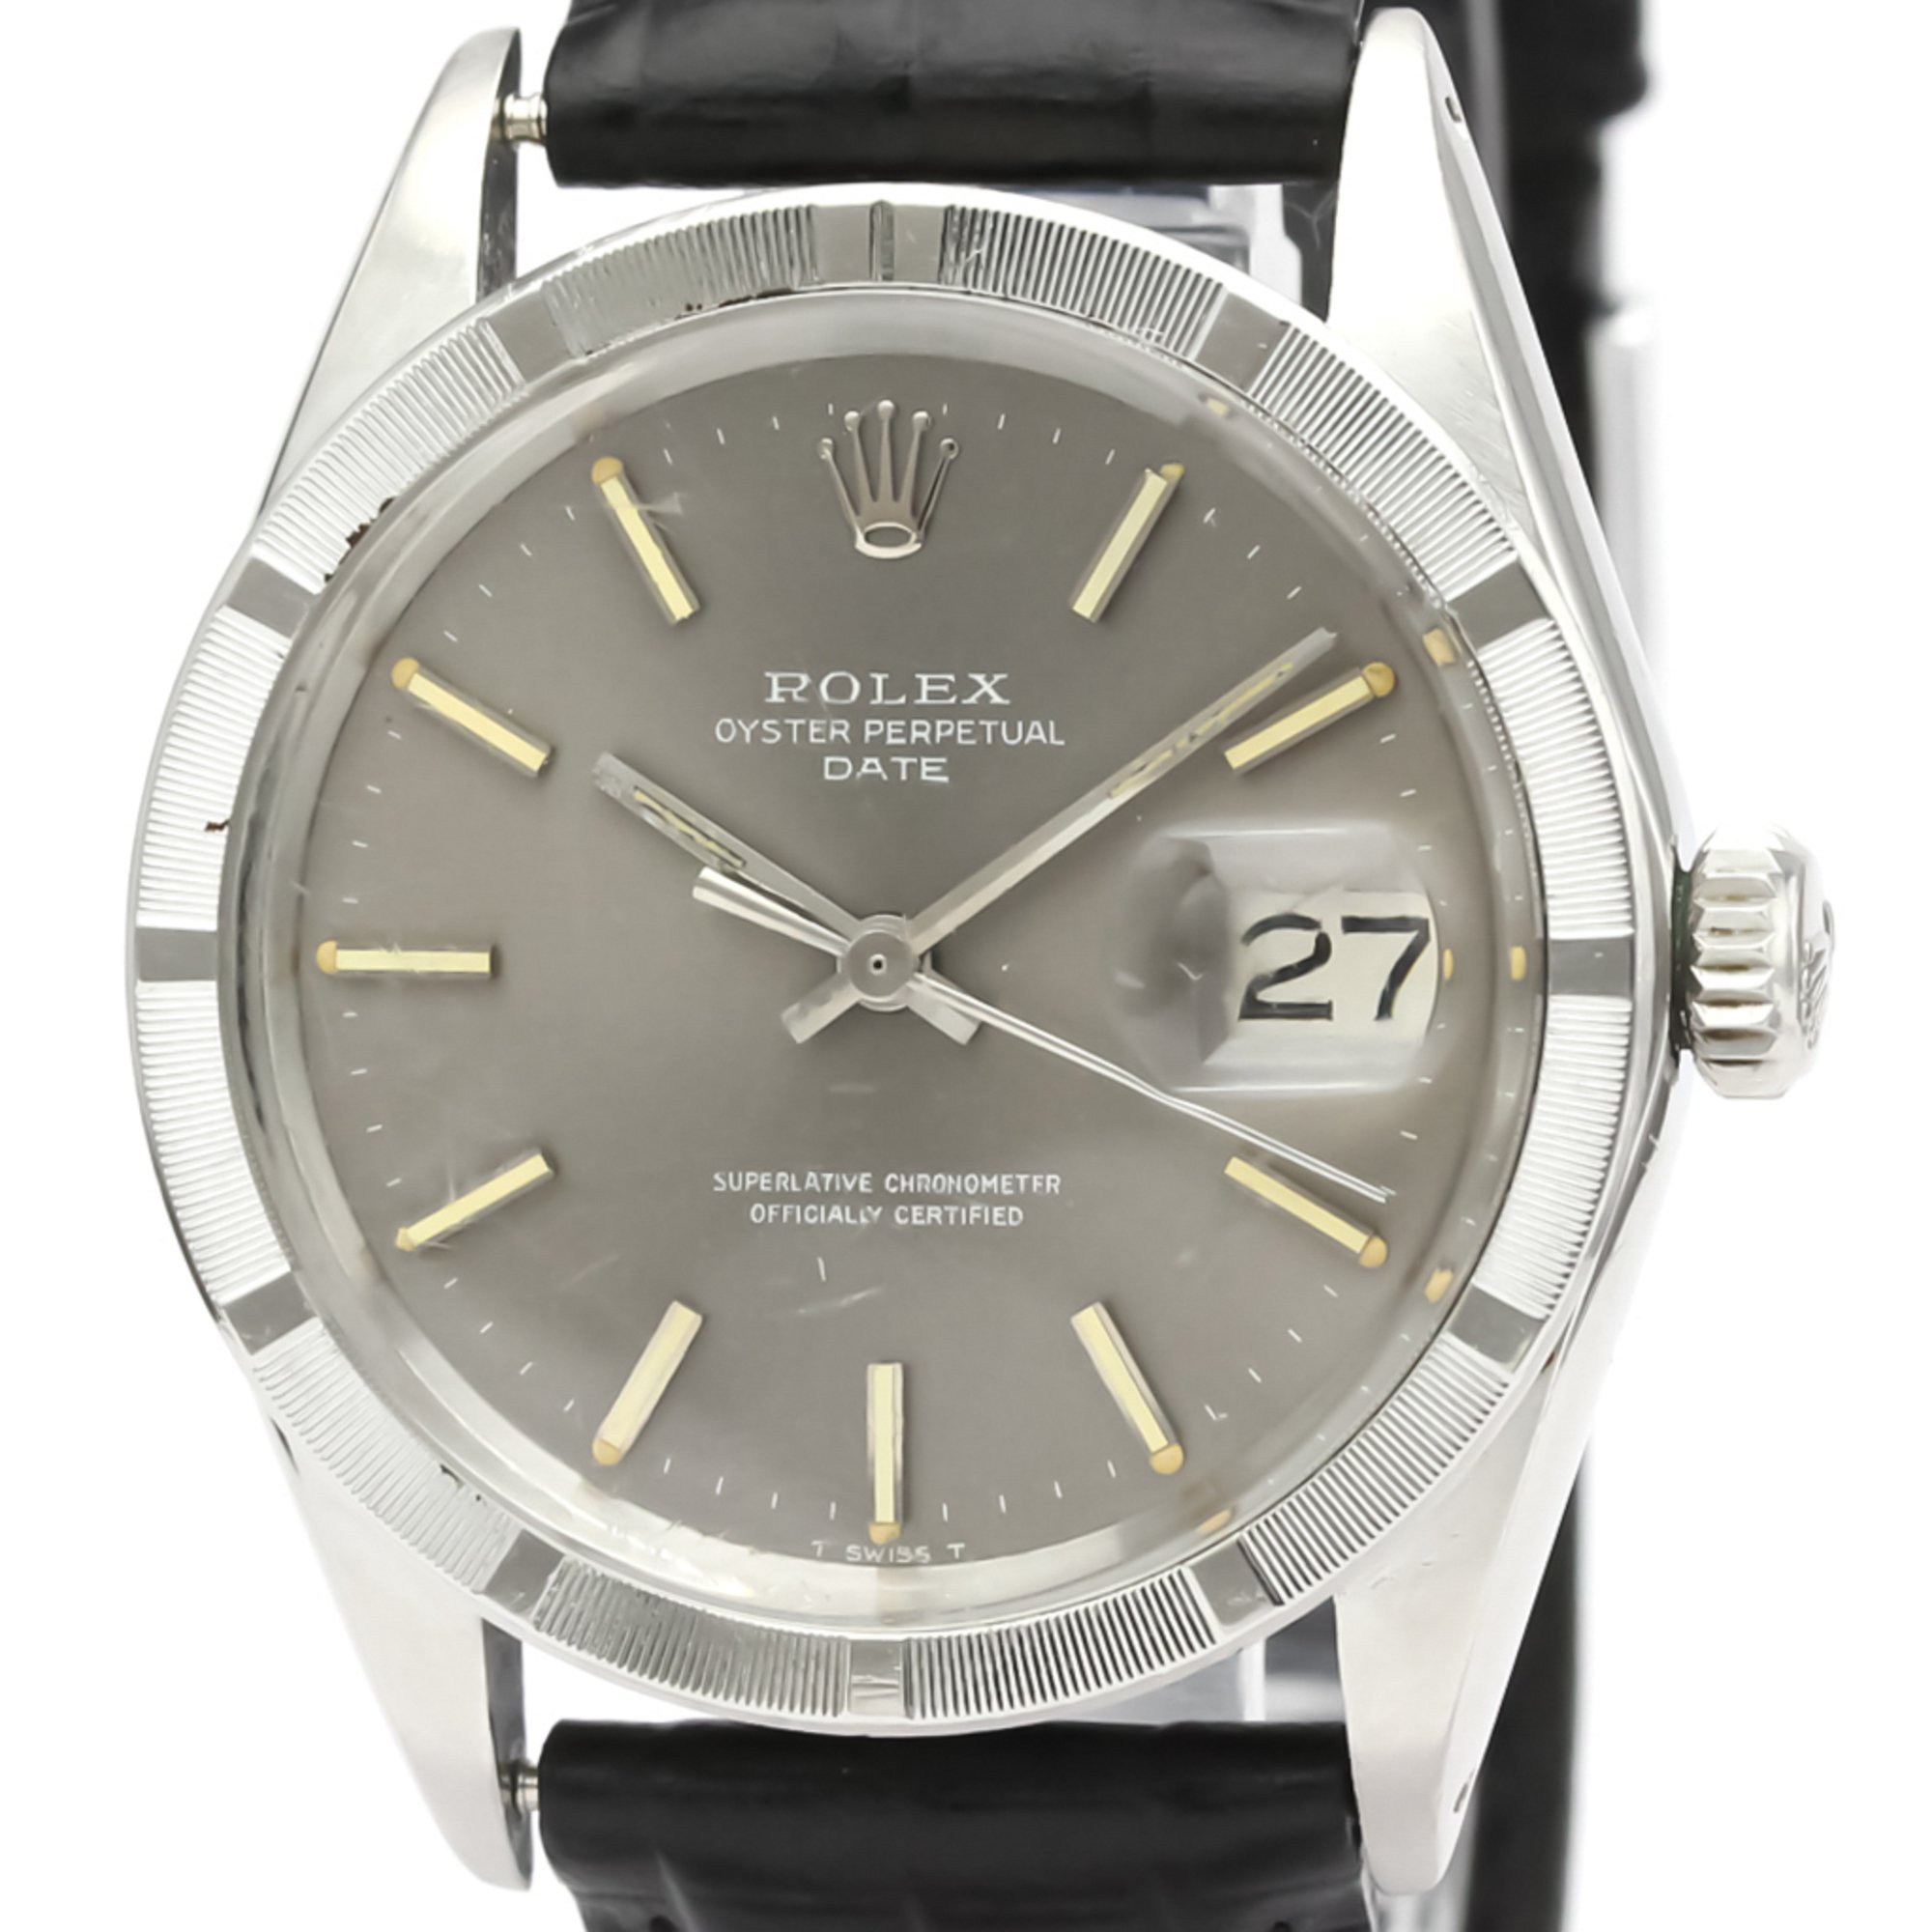 Rolex Automatic Stainless Steel Men's Dress Watch 1501